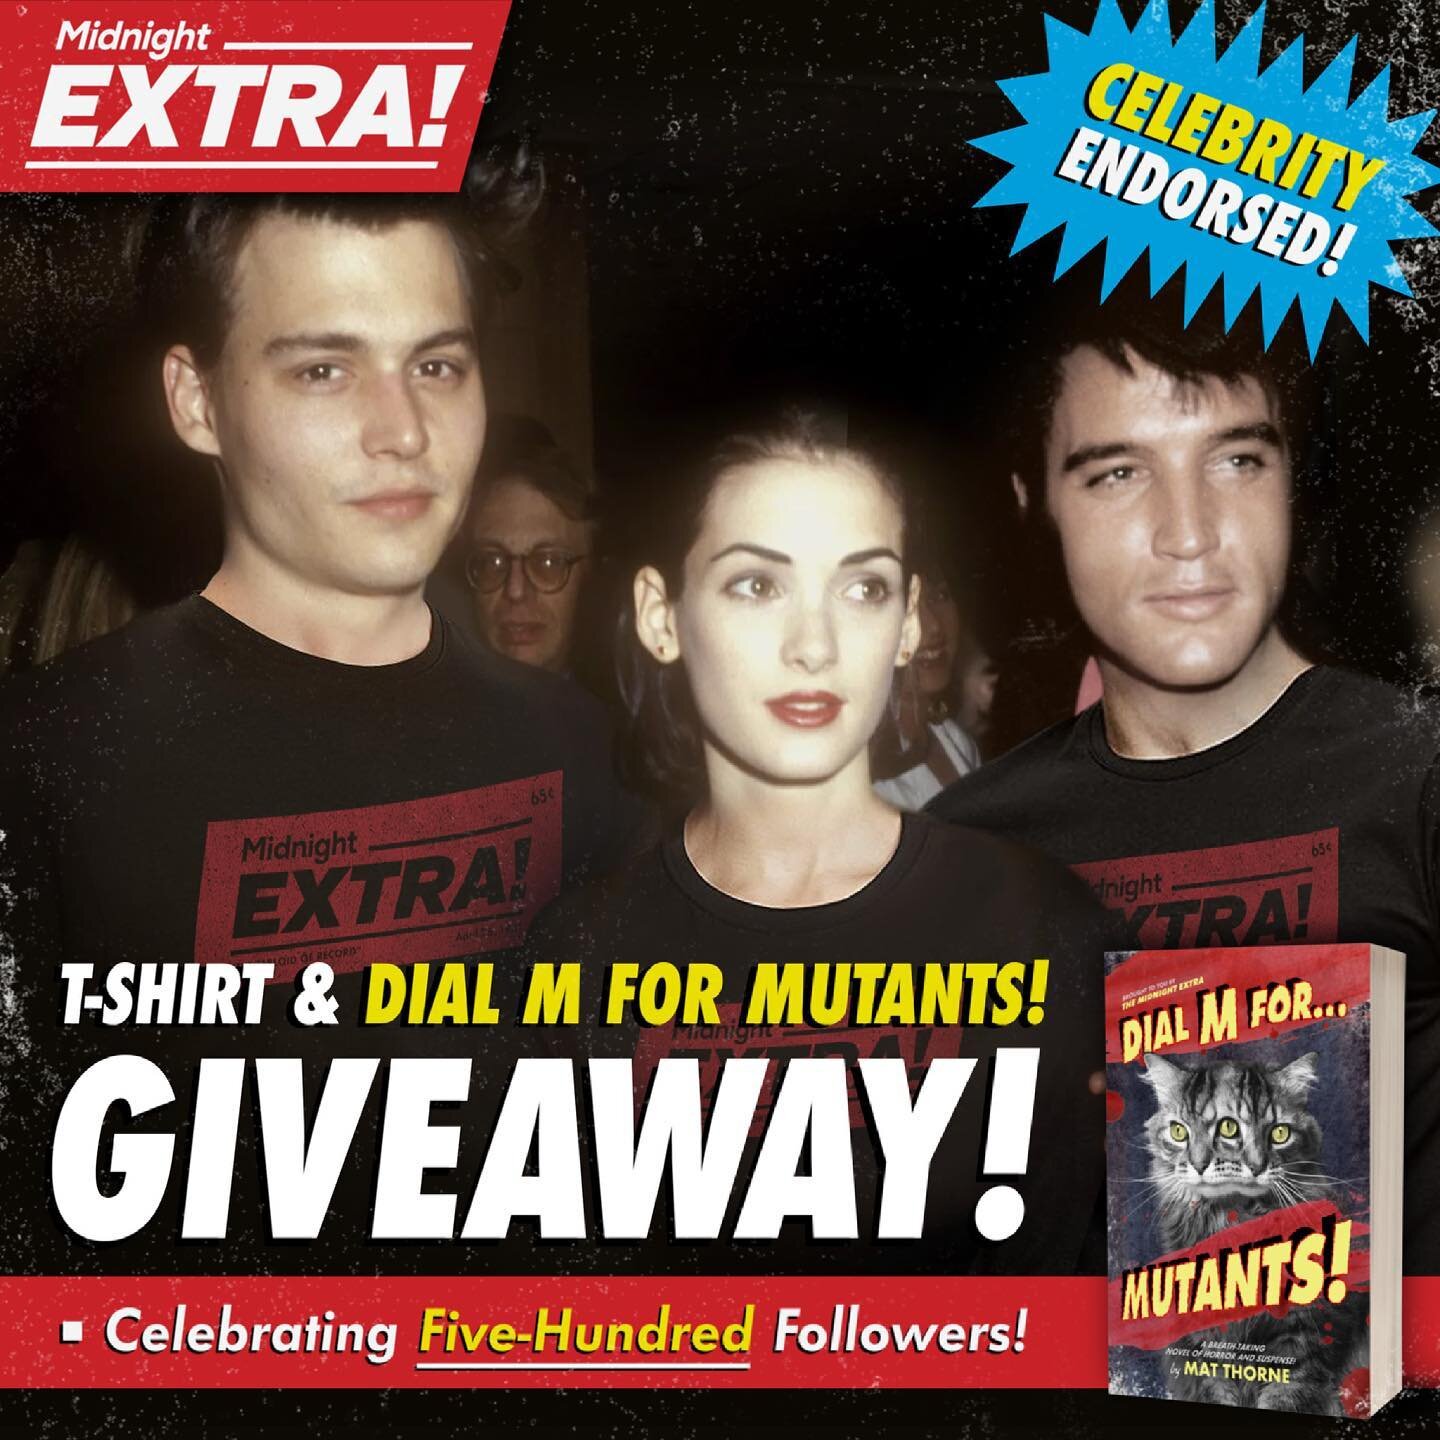 500 FOLLOWERS?? Amazing! Guess it&rsquo;s time for a SPOOKY GIVEAWAY! The big winner gets a brand new Midnight Extra T-Shirt and a signed copy of DIAL M FOR MUTANTS! Enter today!
-
👻 Follow The Midnight Extra
🤖 Tag two friends in the comments
🛸 Li